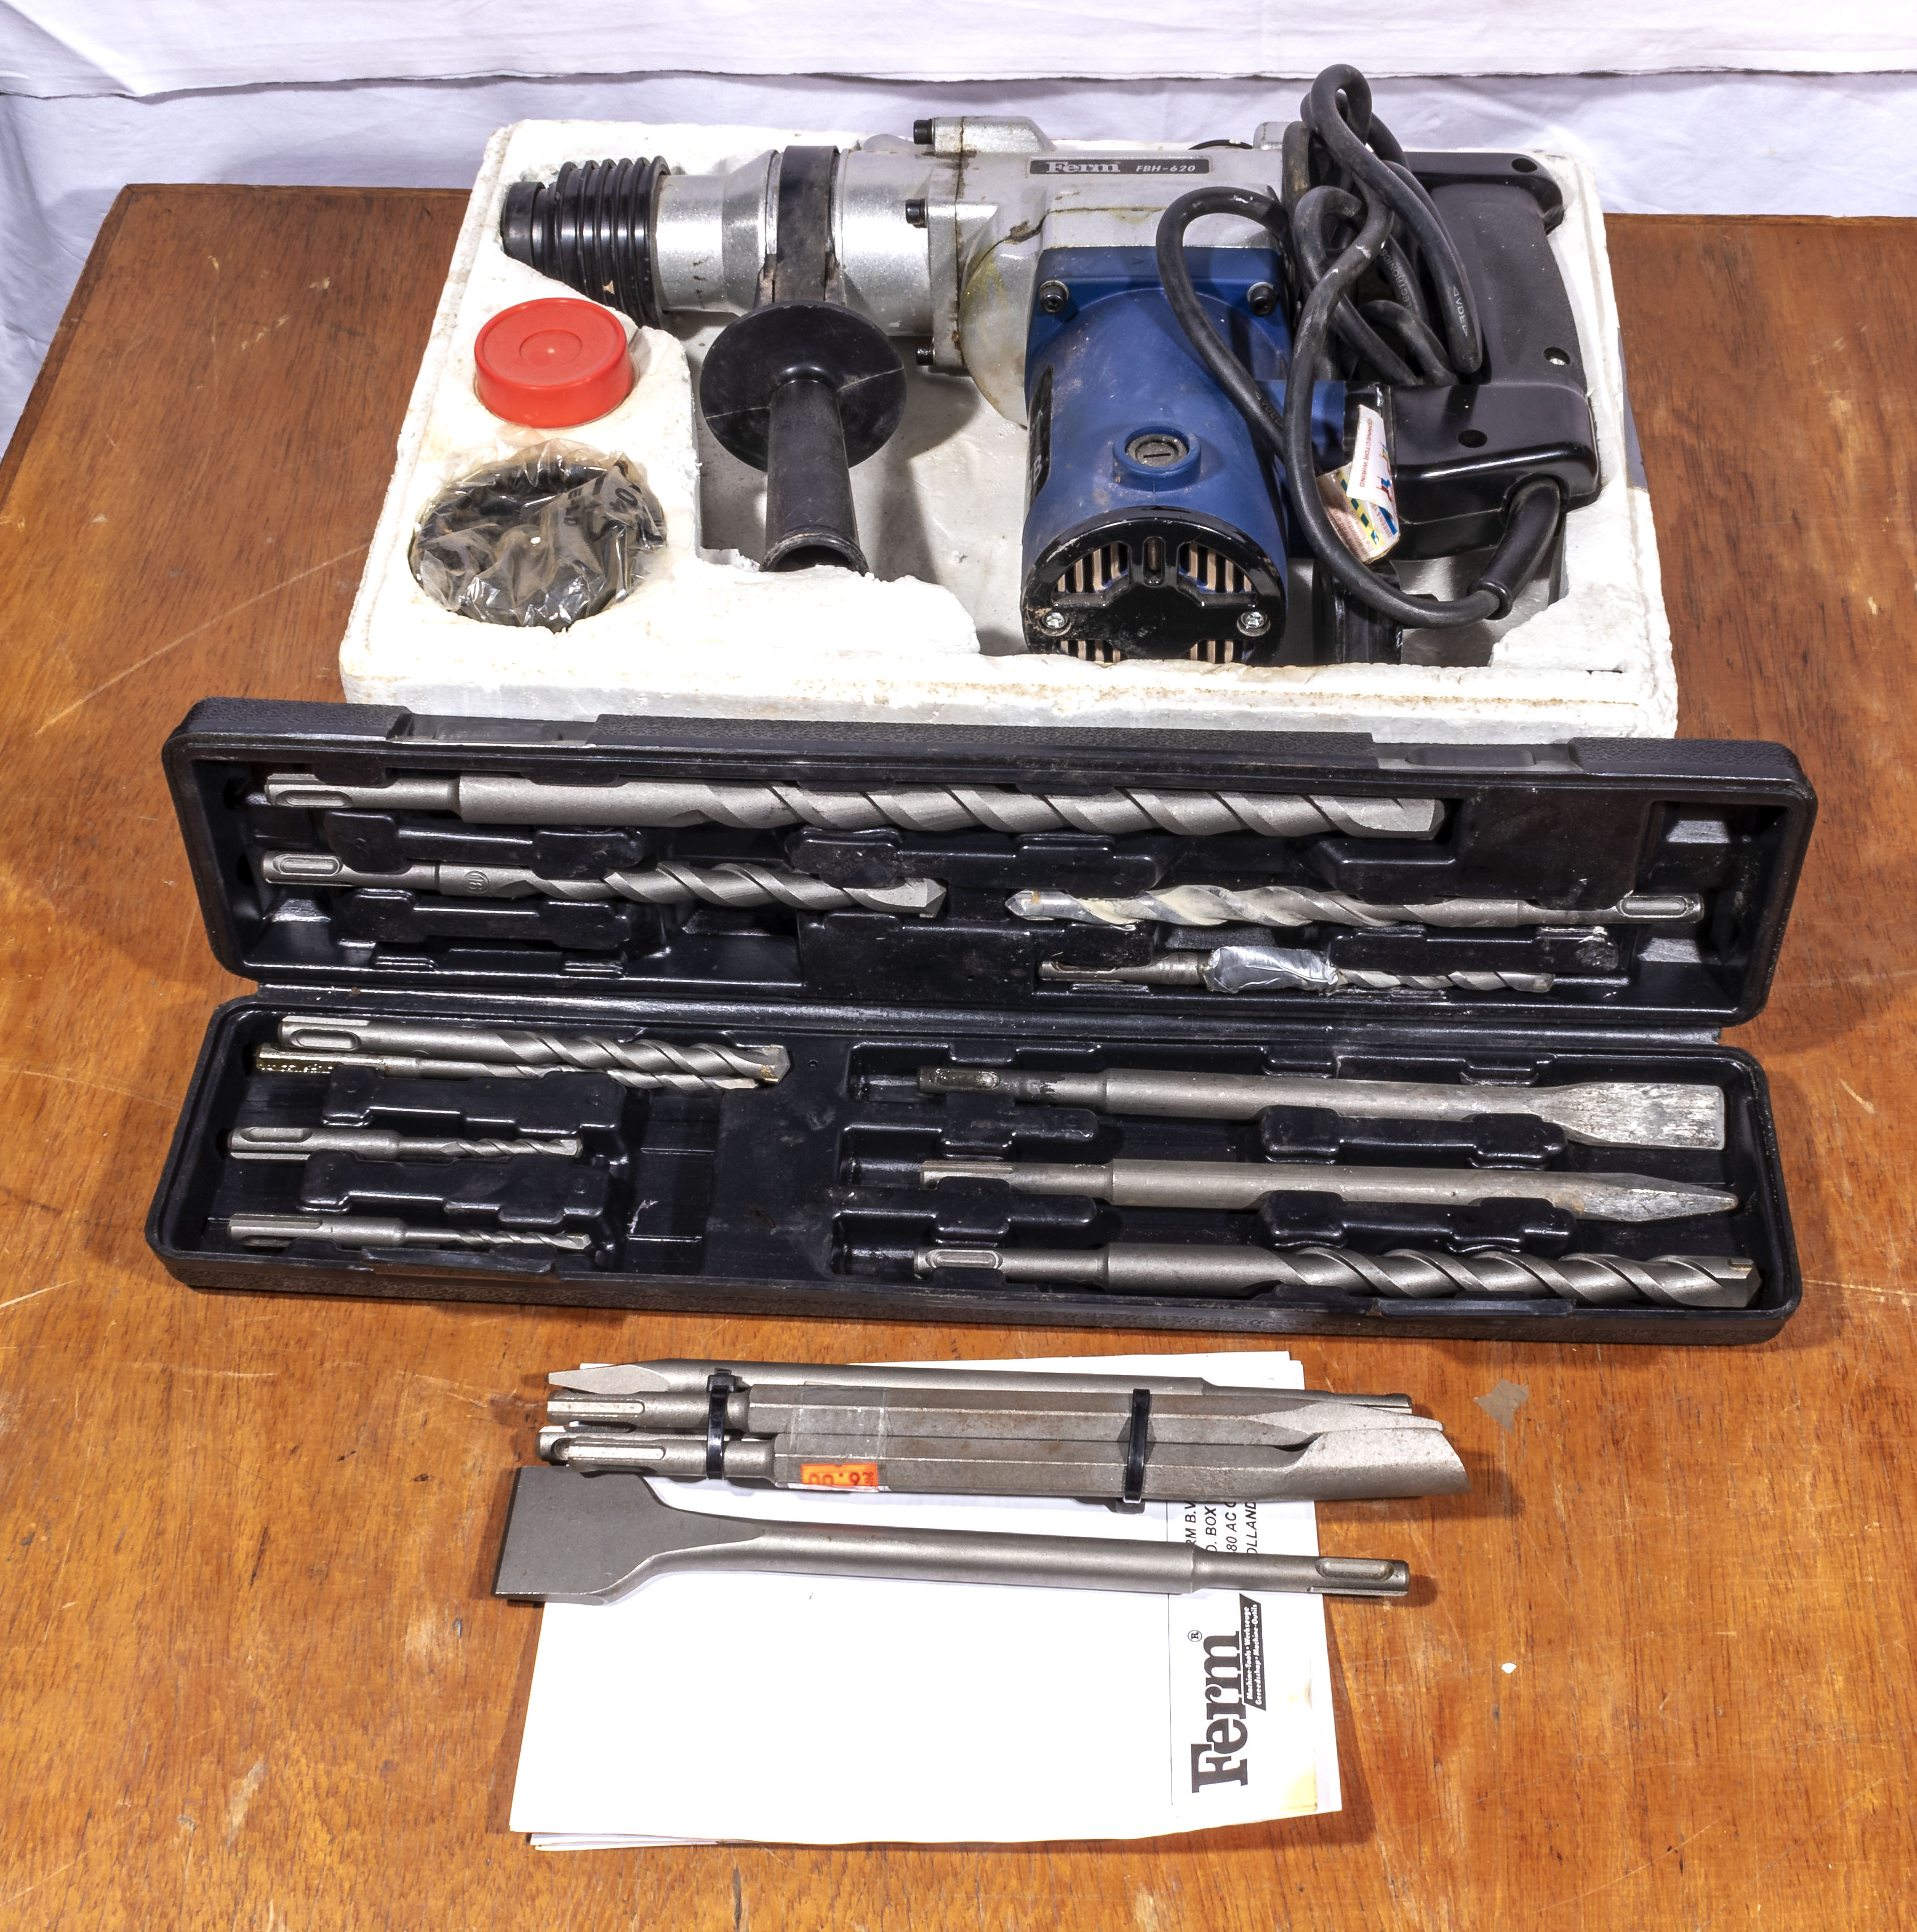 Ferm FBH-620 SDS Rotary hammer drill together with drill bits and chisel attachments